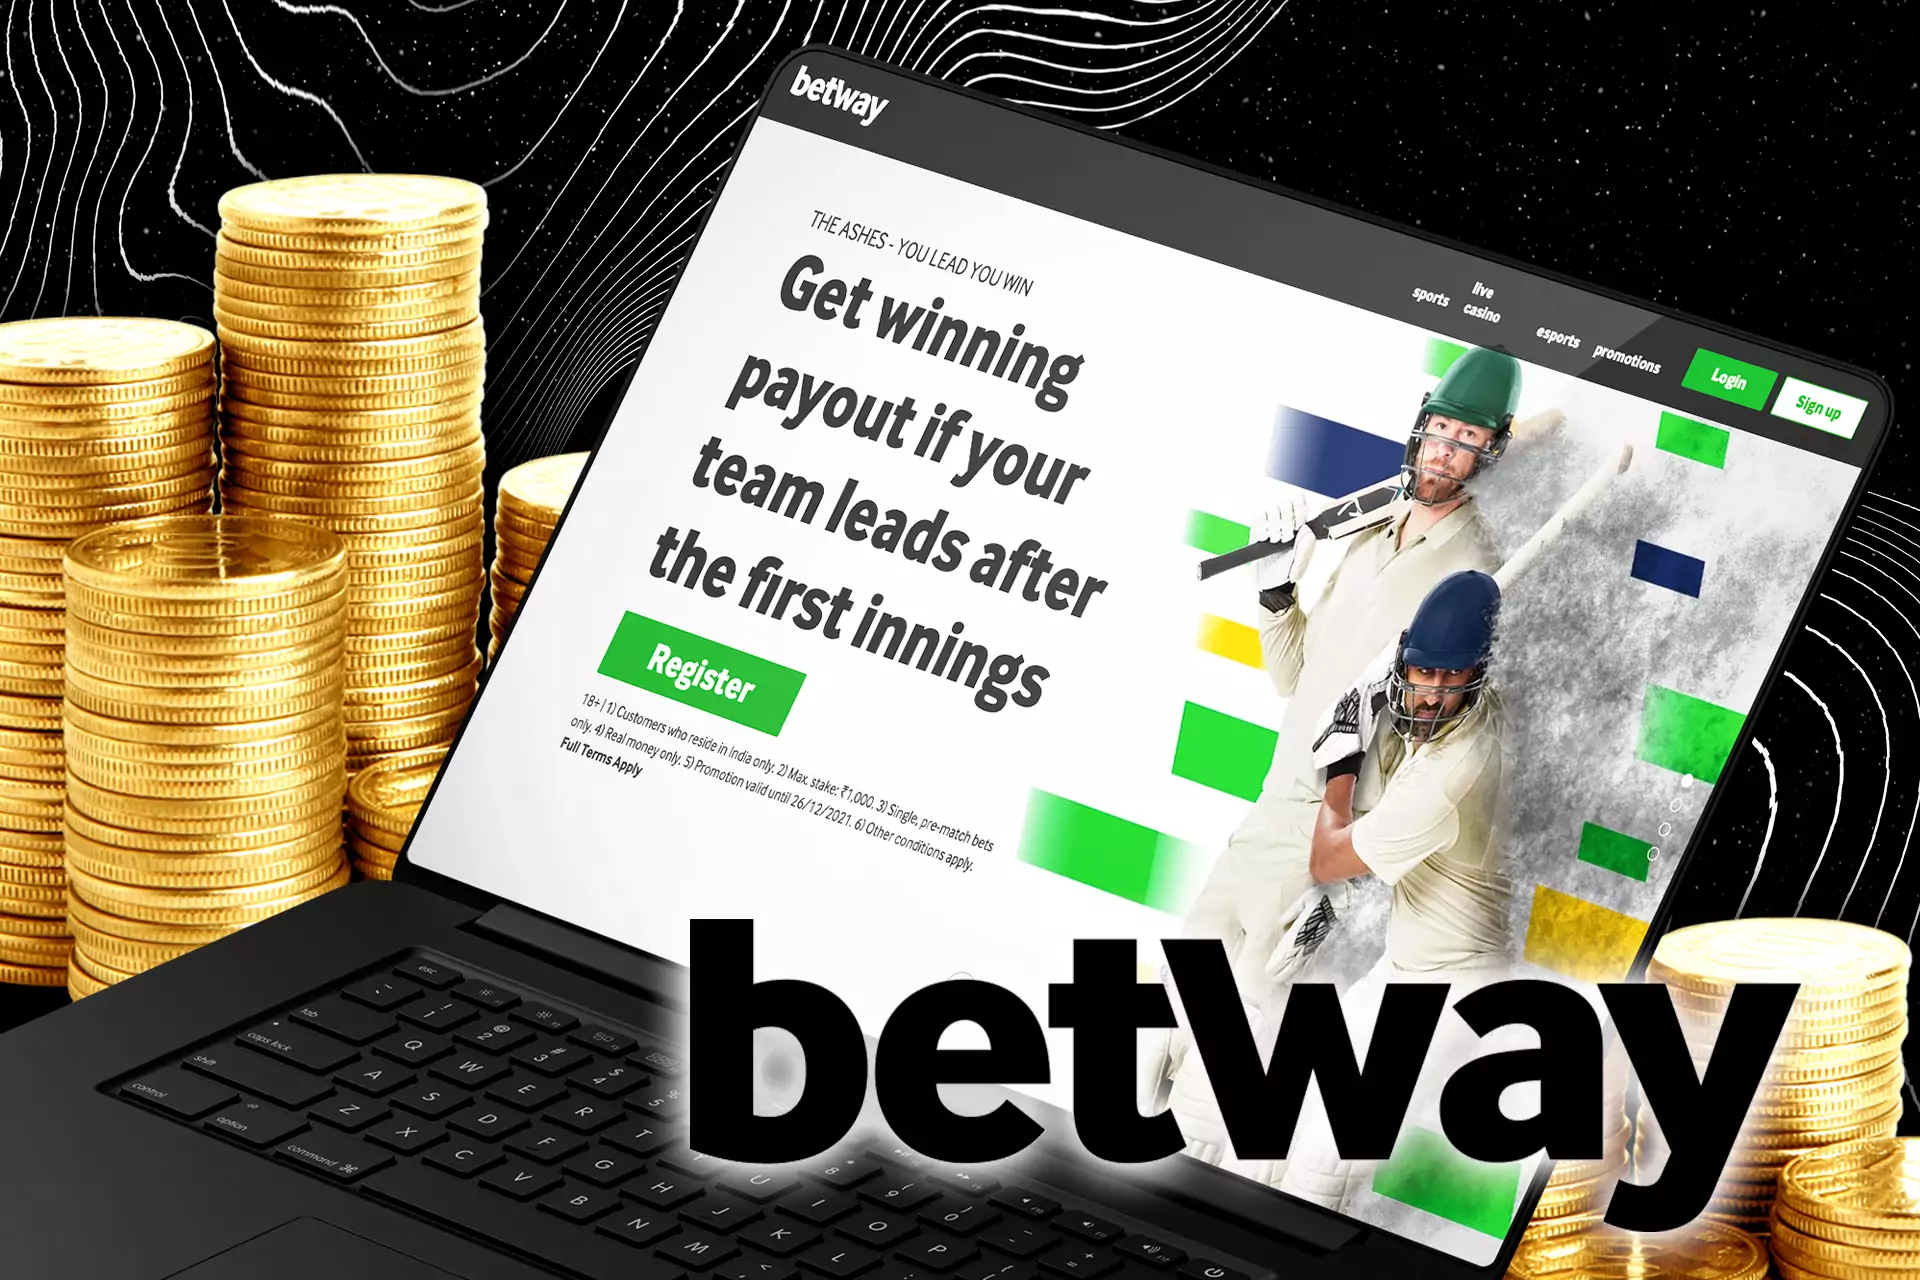 Betway offers online casinos on its official website in India.